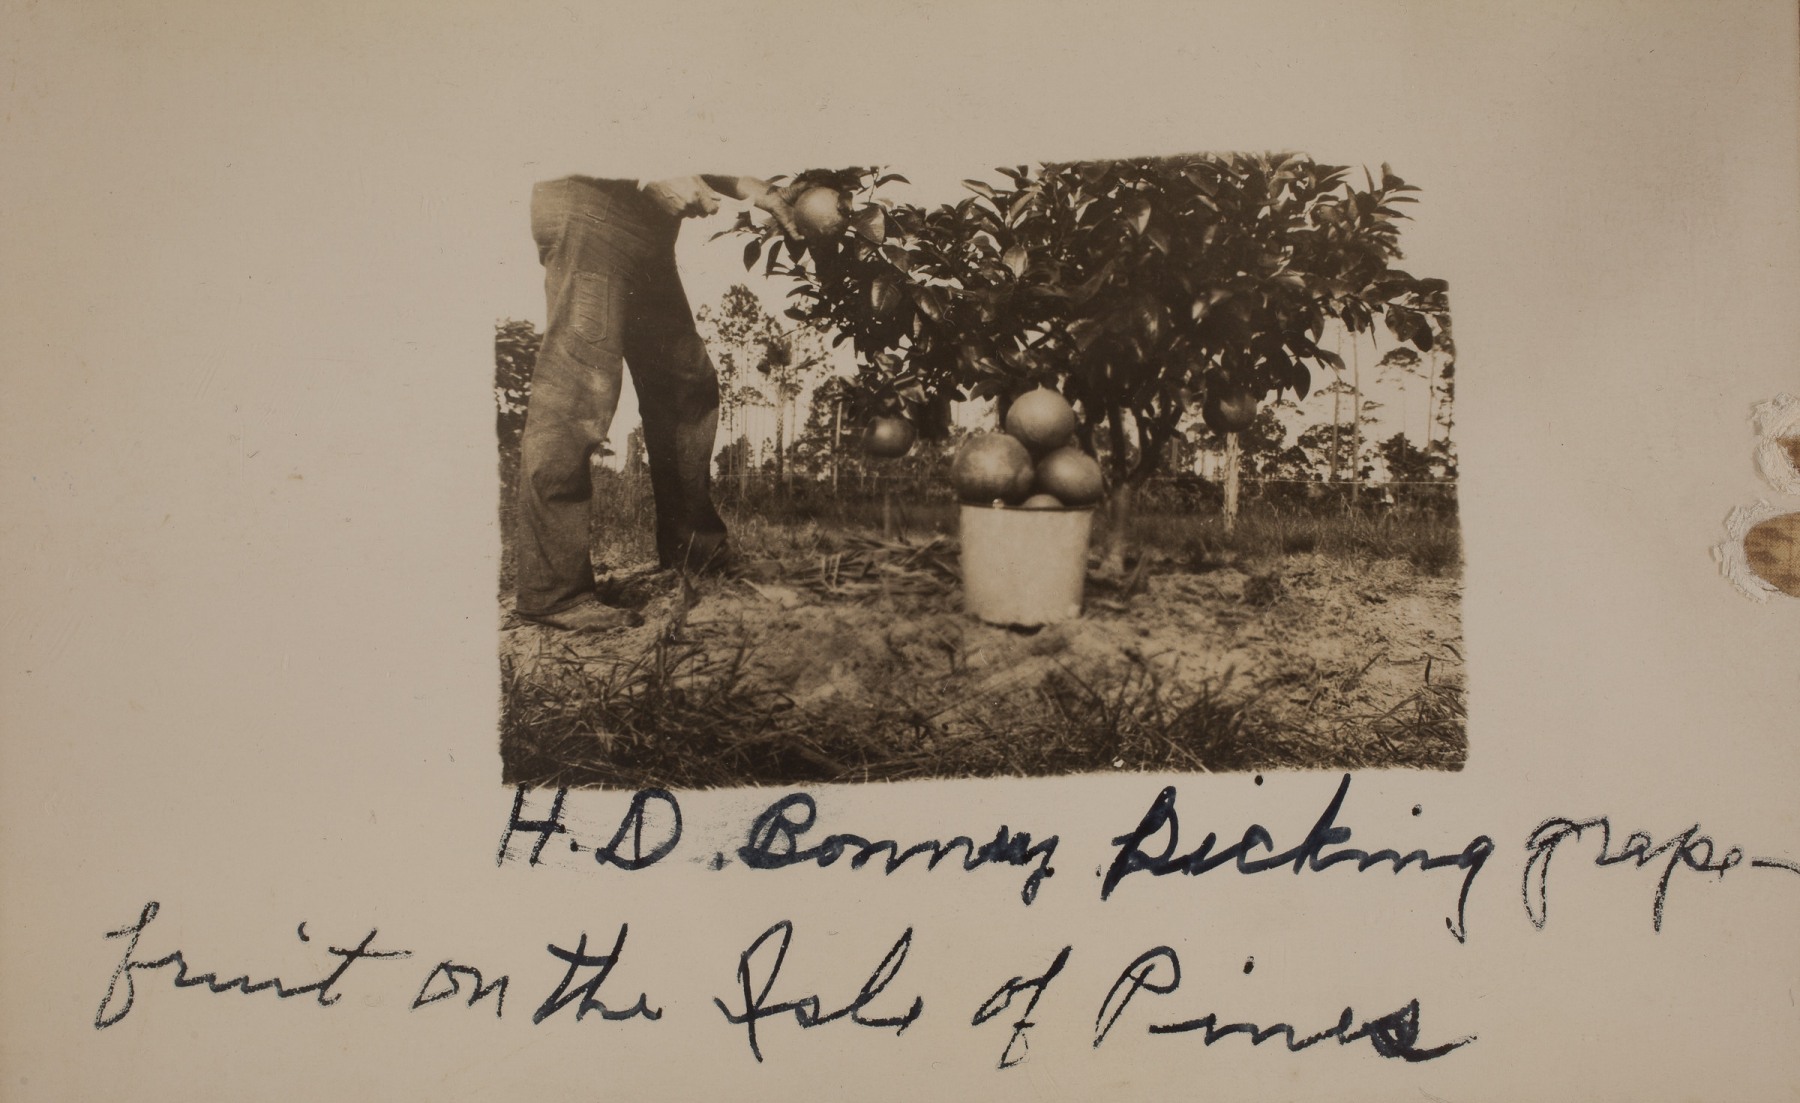 1913  "H.D. Bonney picking grape-fruit on the Isle of Pines" labeled by Nellie Belle Bonney